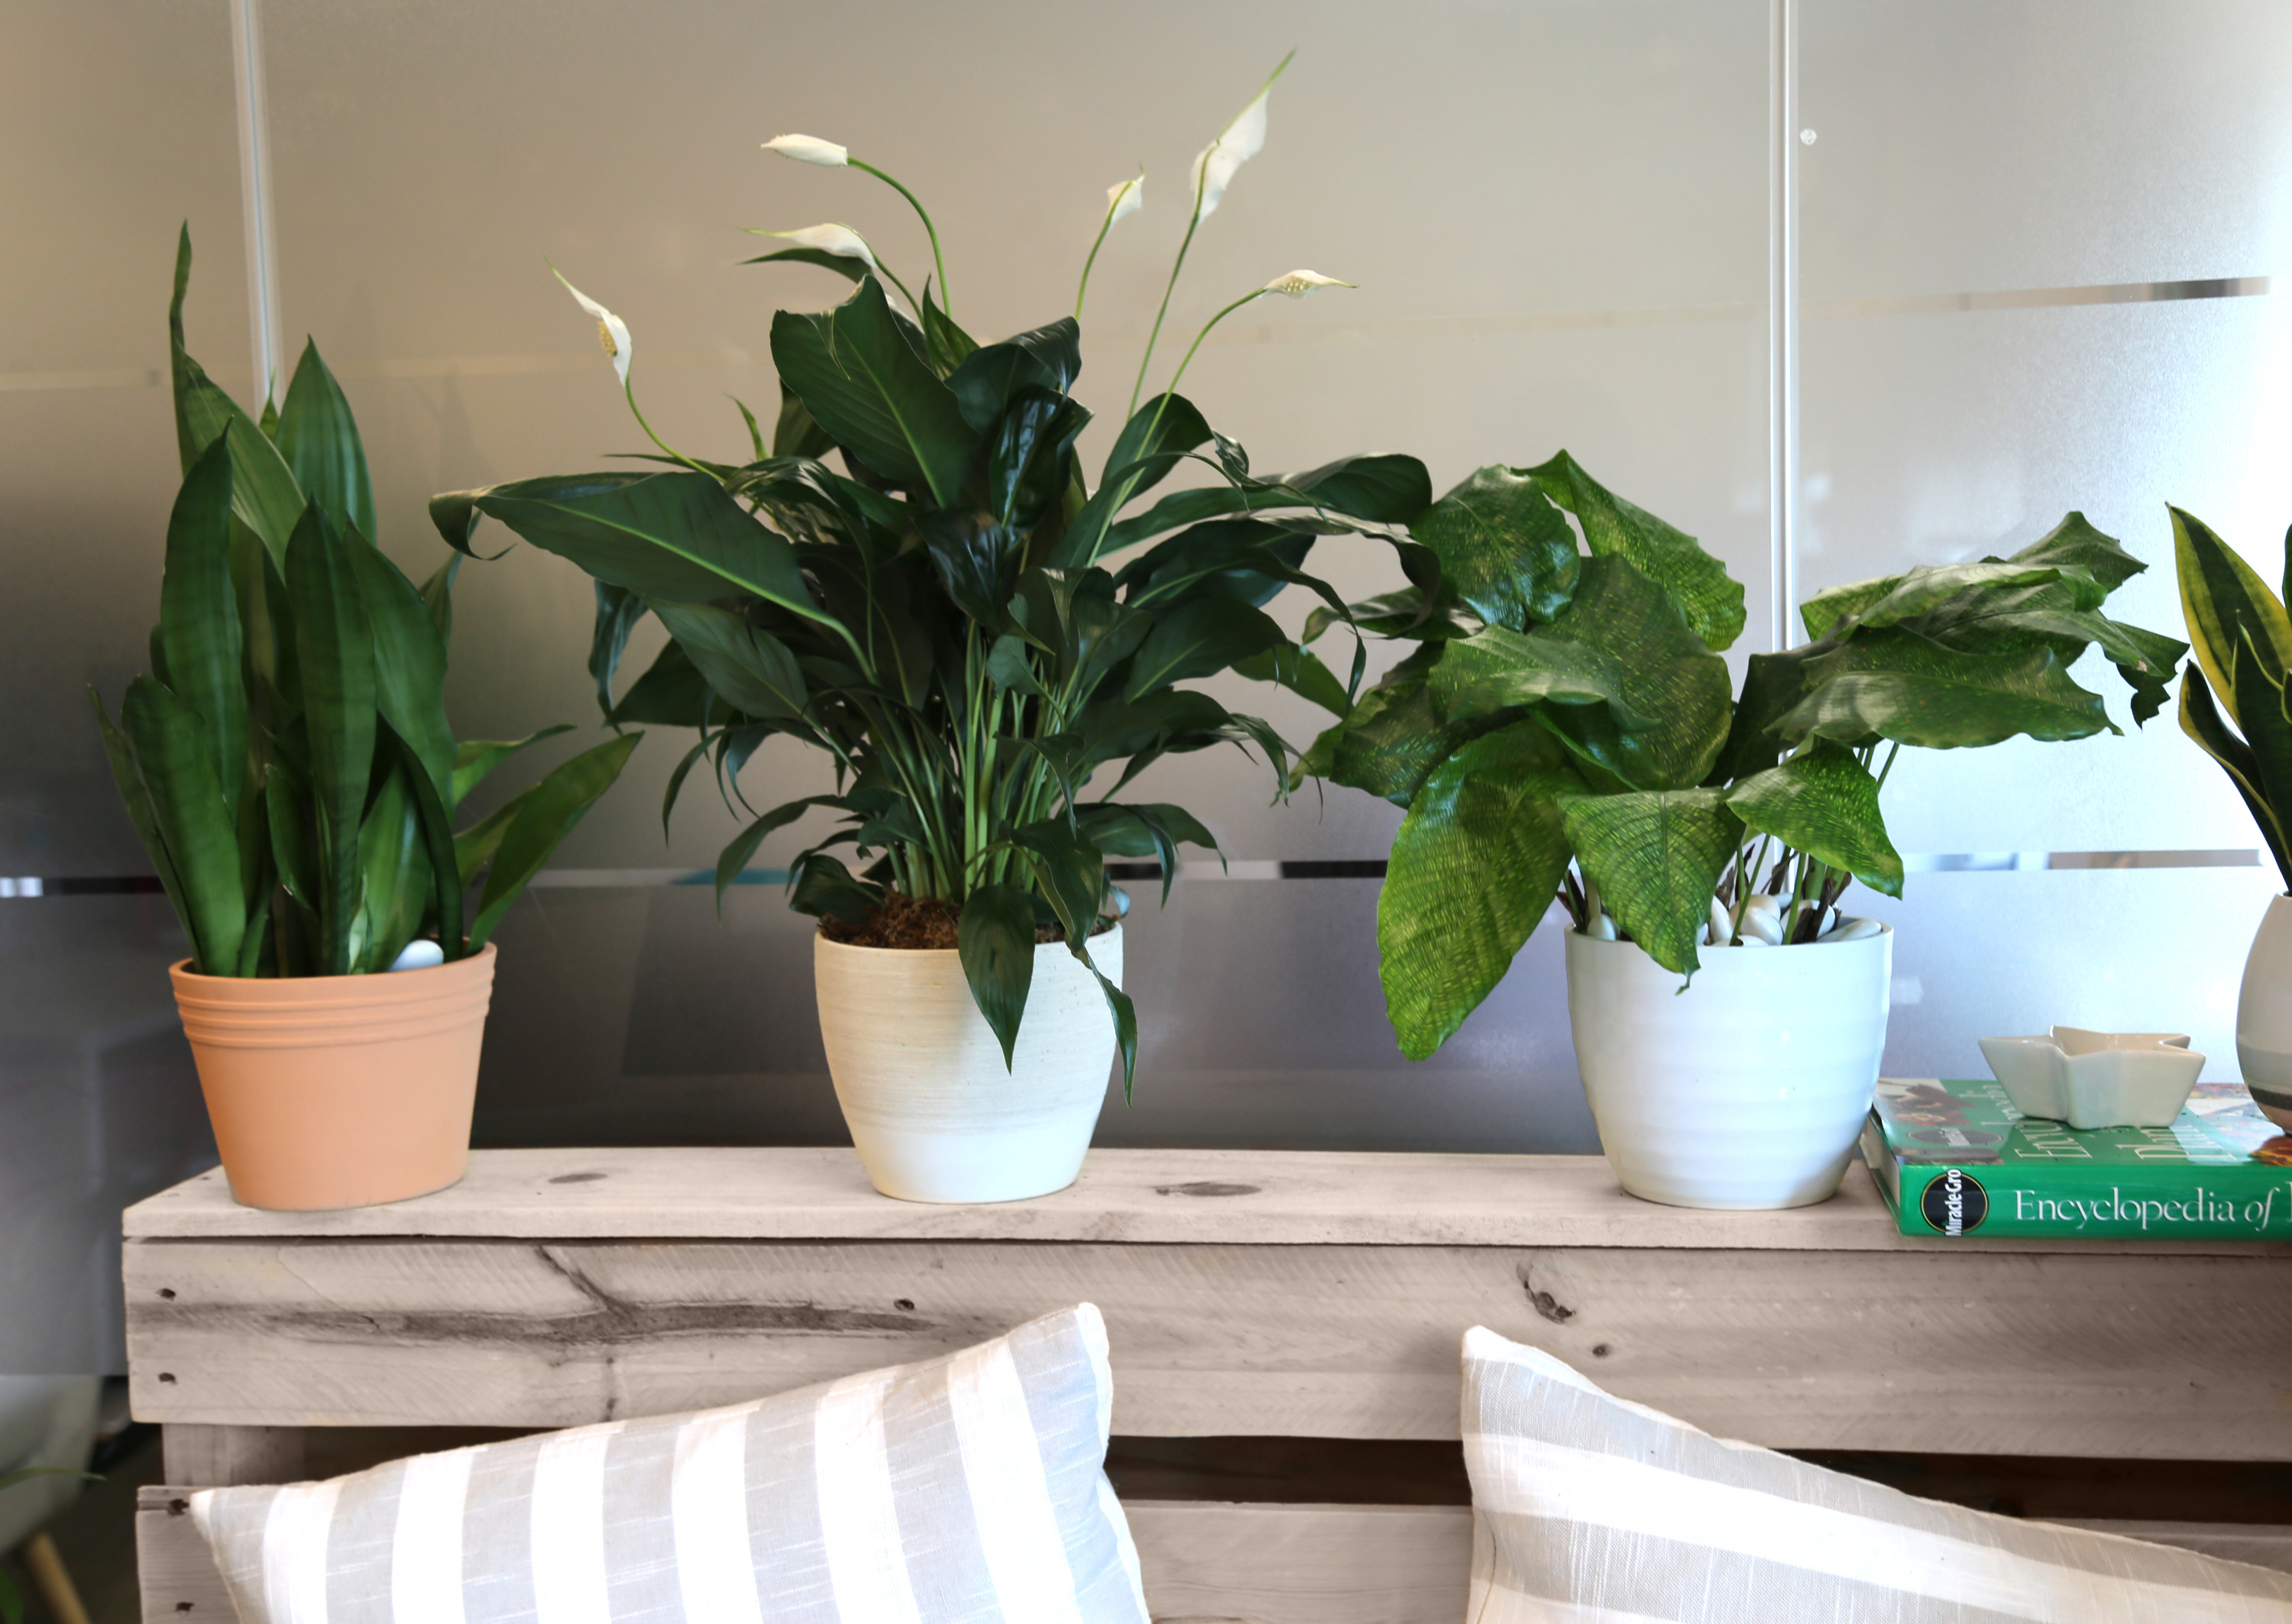 Costa Farms Live Indoor 15in. Tall White Peace Lily; Indirect Sunlight Plant in 6in. Grower Pot - image 3 of 10